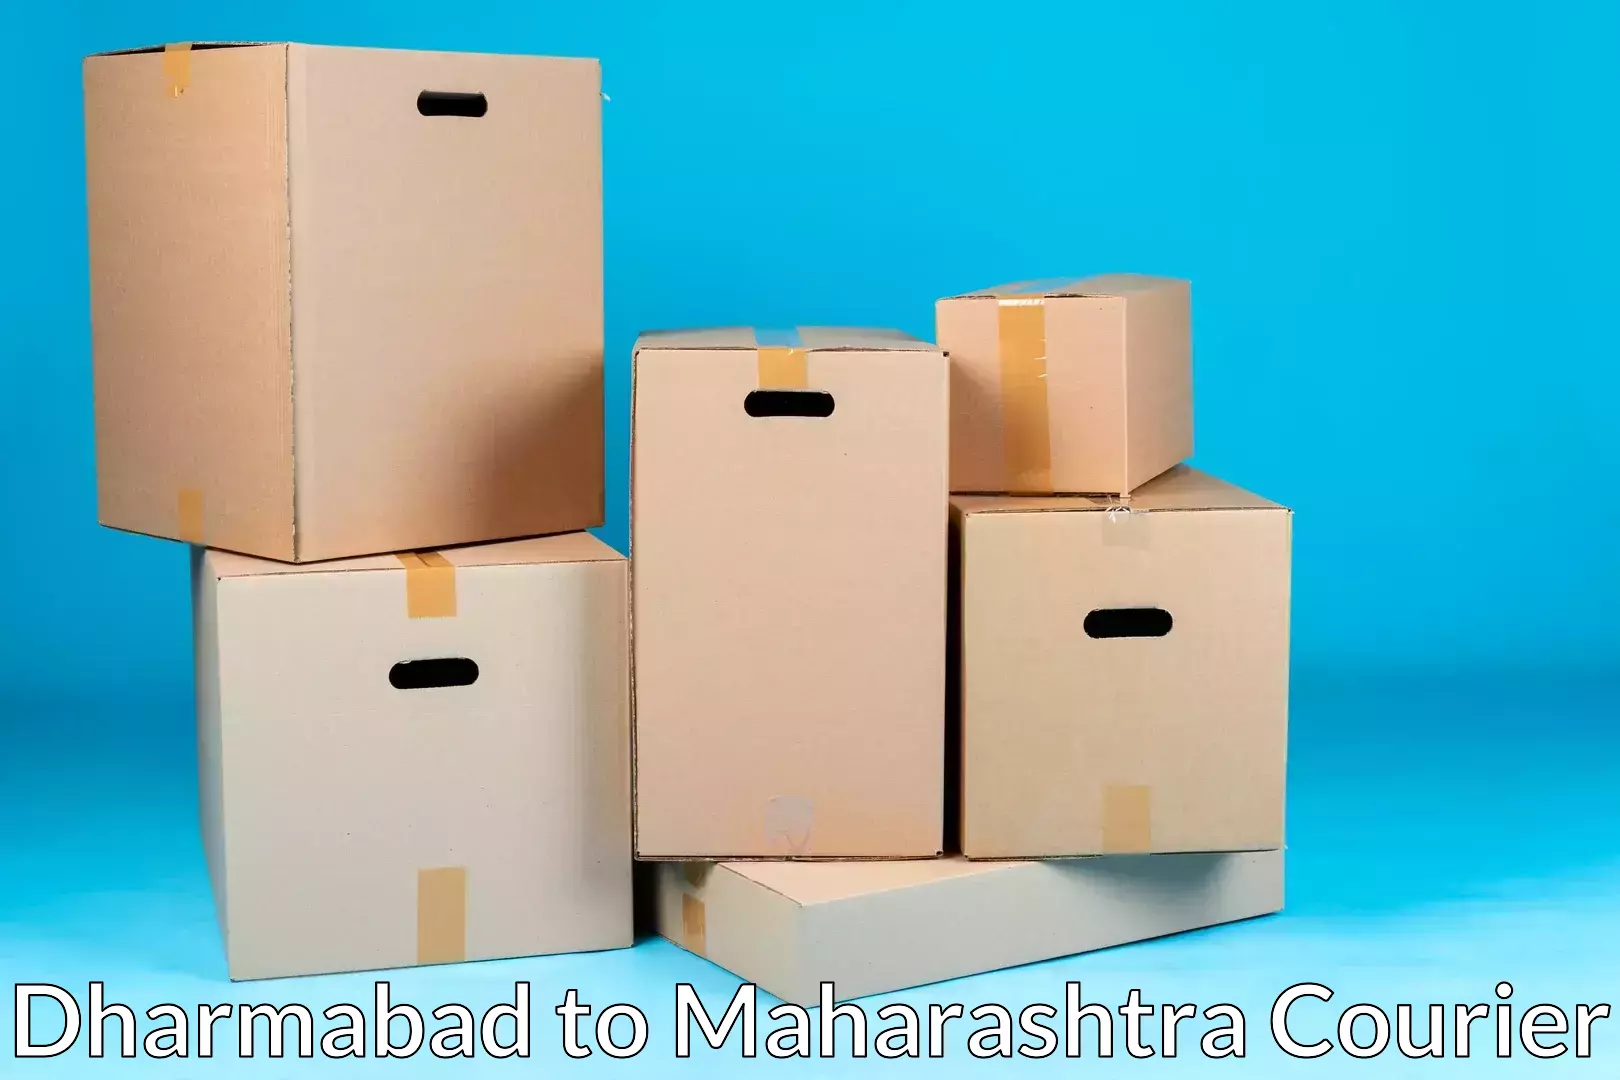 Furniture transport company Dharmabad to Pune